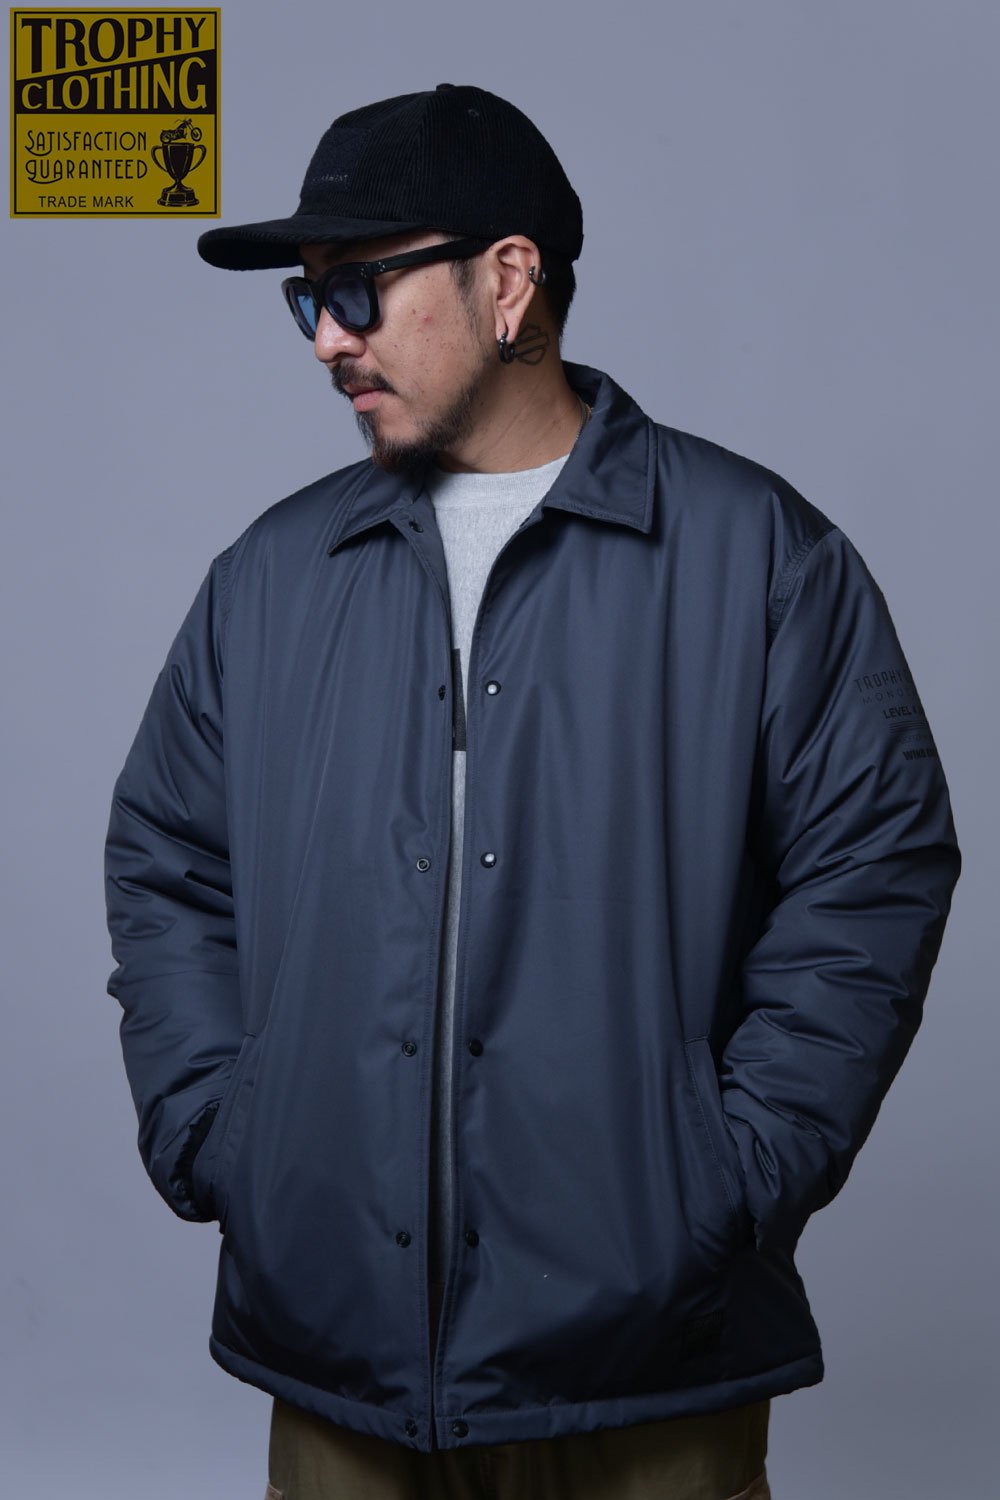 TROPHY CLOTHING(トロフィークロージング) ウィンドブレーカー “MONOCHROME” LEVEL 4 WIND BREAKER  TR22AW-506 通販正規取扱 | ハーレムストア公式通販サイト